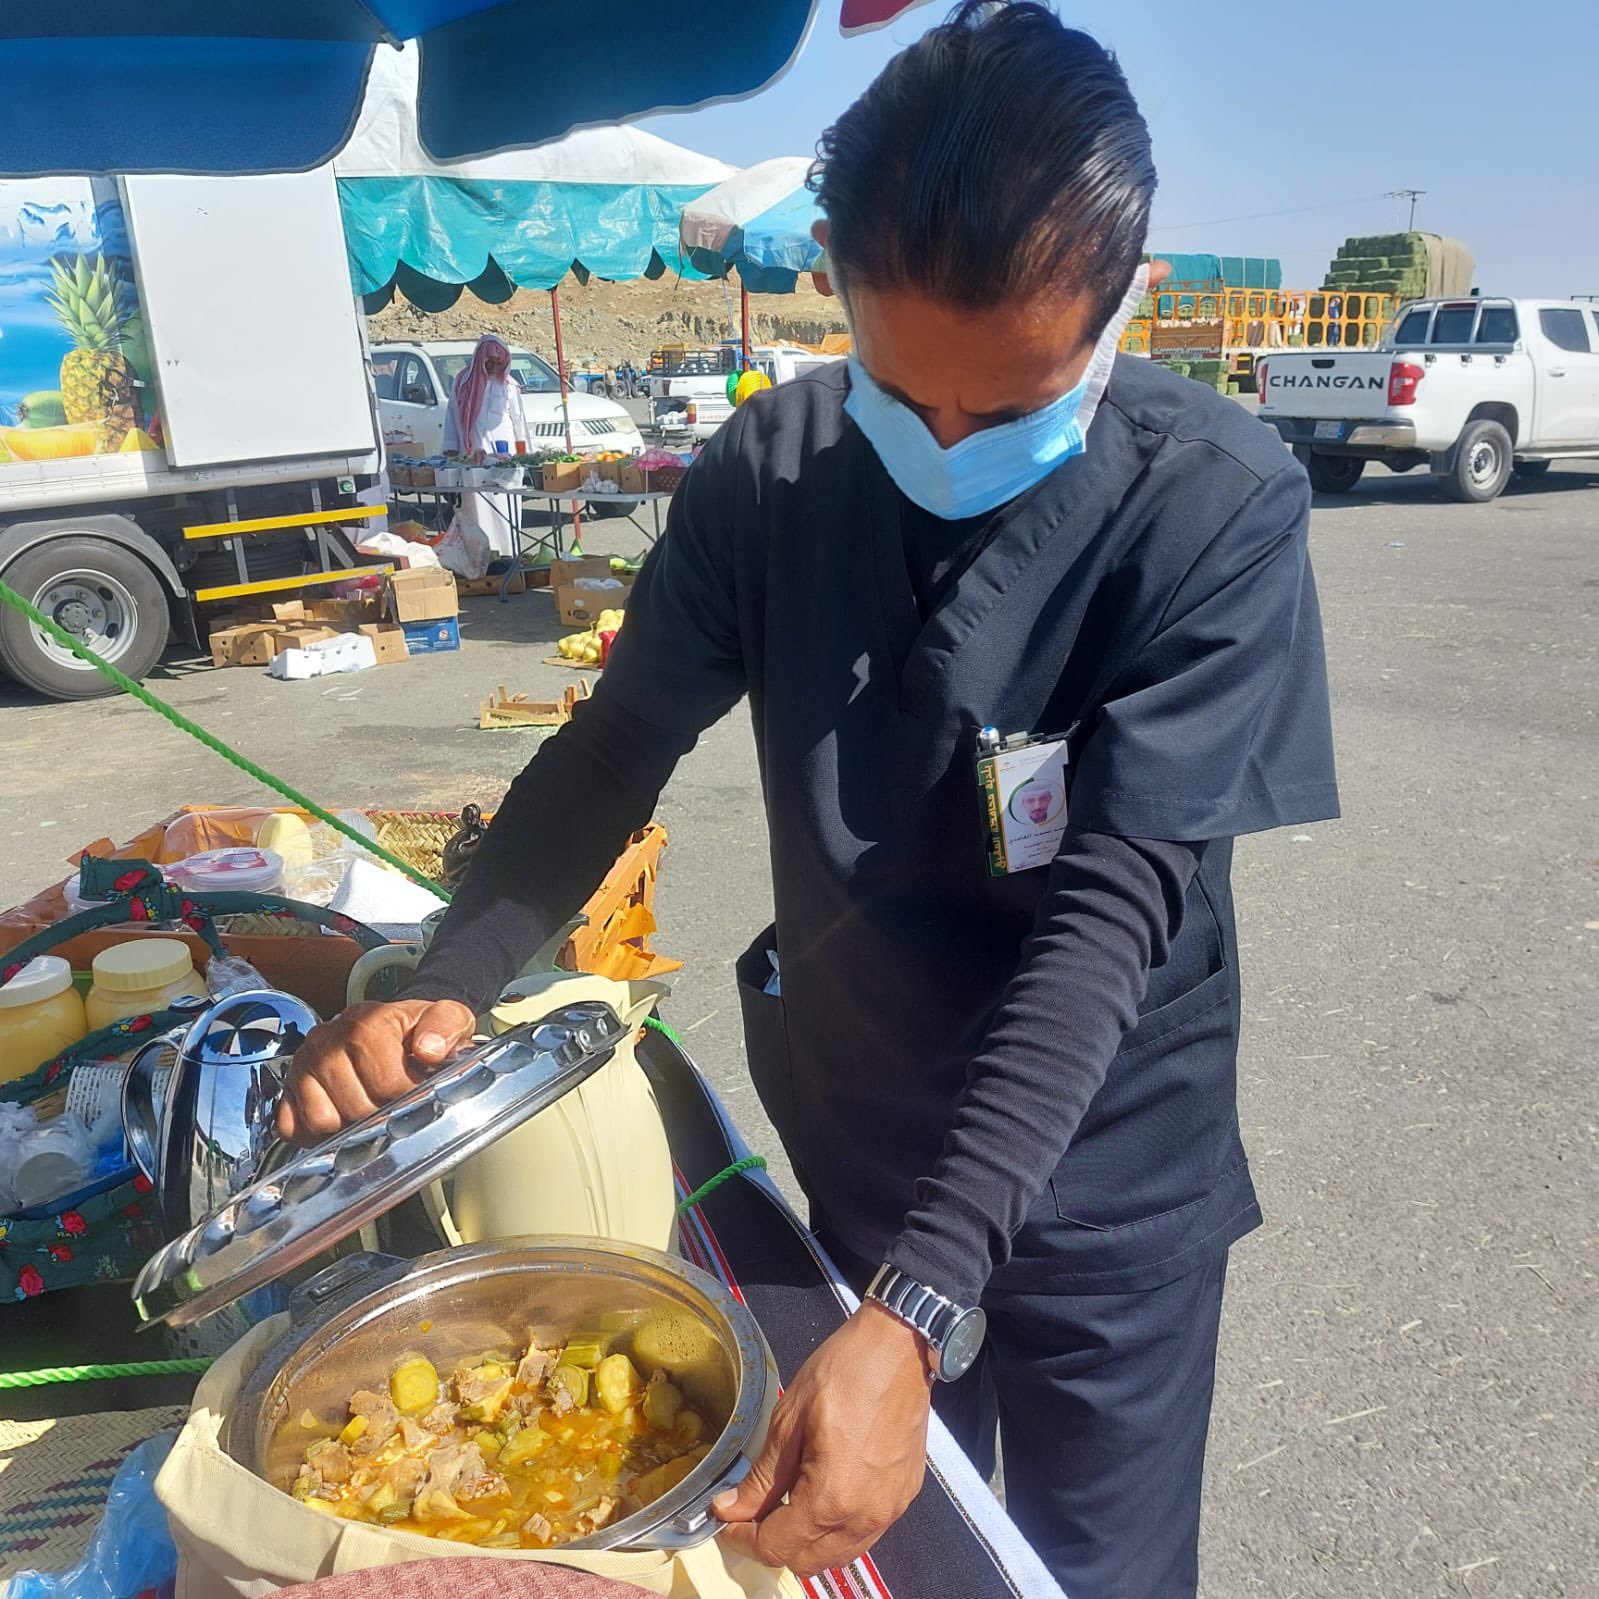 The Municipality of Al-Aqiq Governorate, represented by the Environmental Health Department, intensifies its inspection tours of the Wednesday market